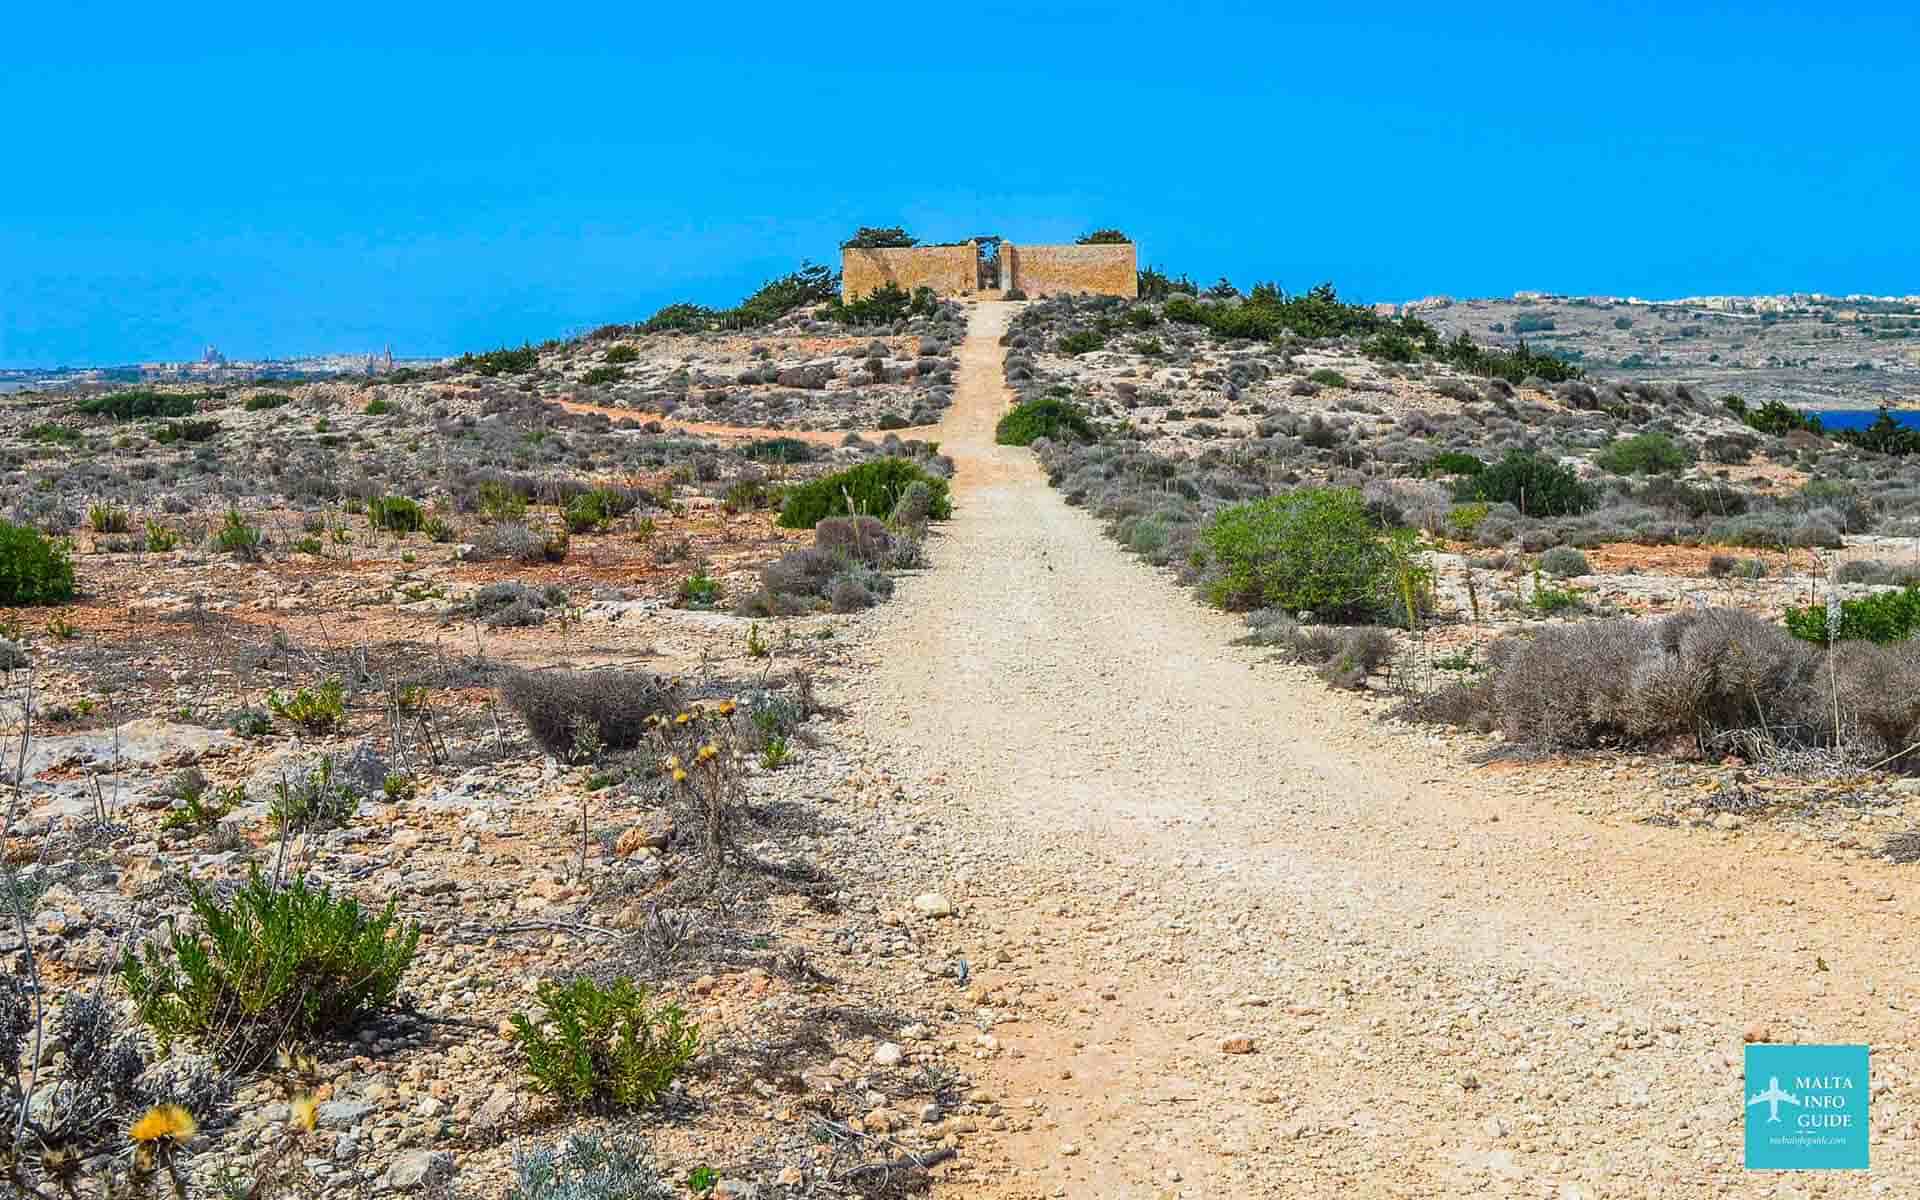 The cemetery located in the centre of the island of Comino.